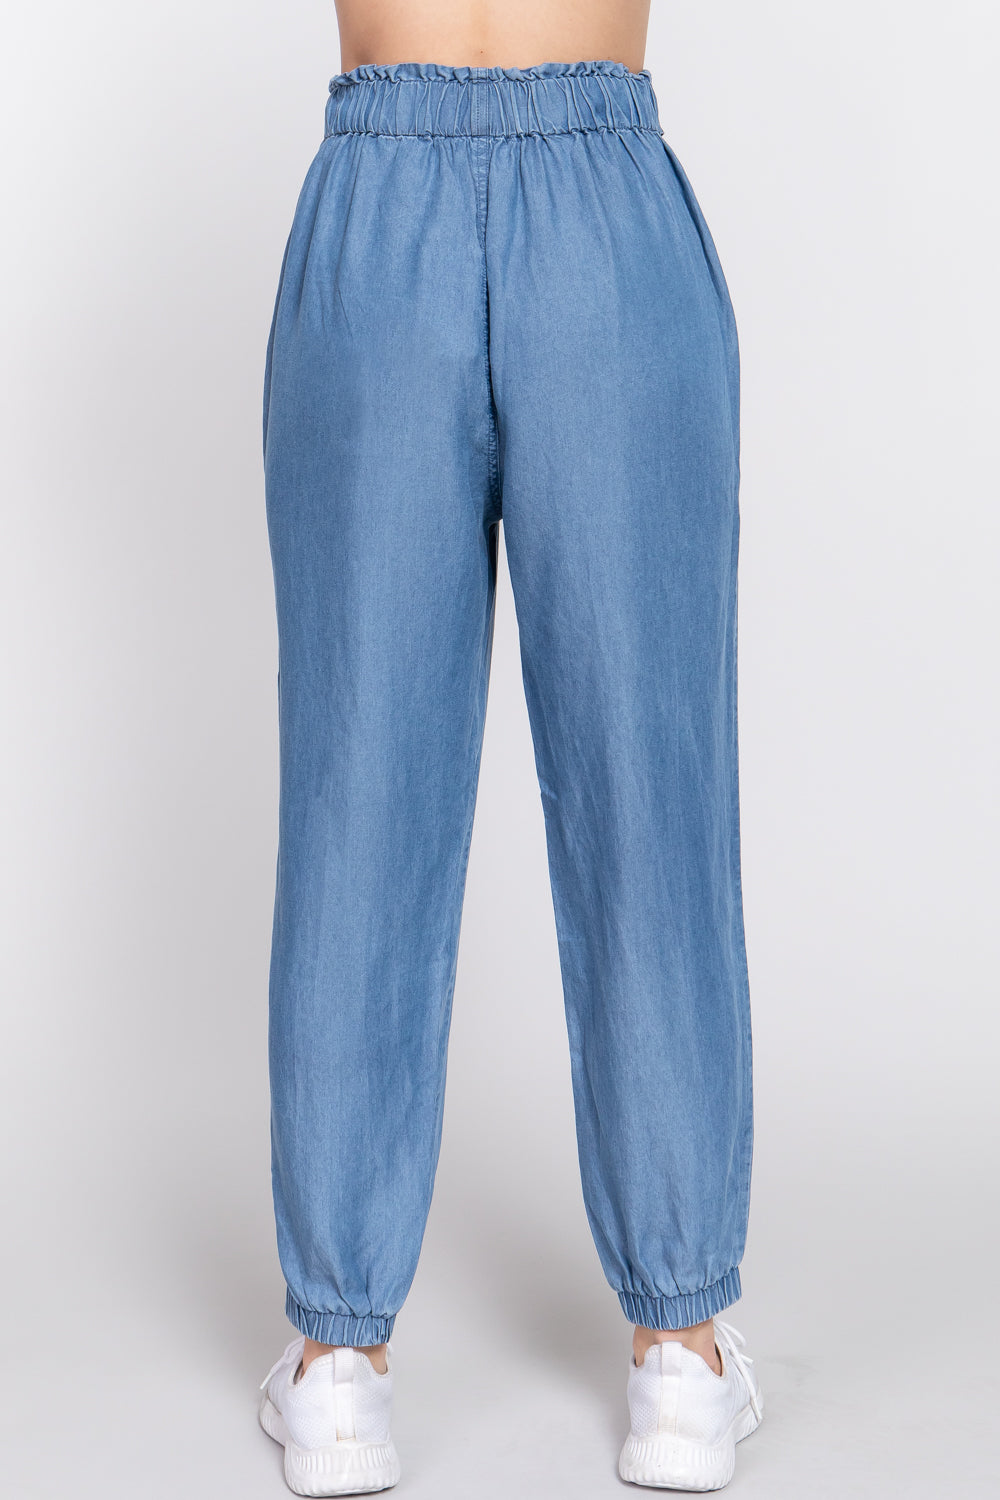 Ribbon Tie Denim Jogger Pants - Ships from The US - women's jeans at TFC&H Co.